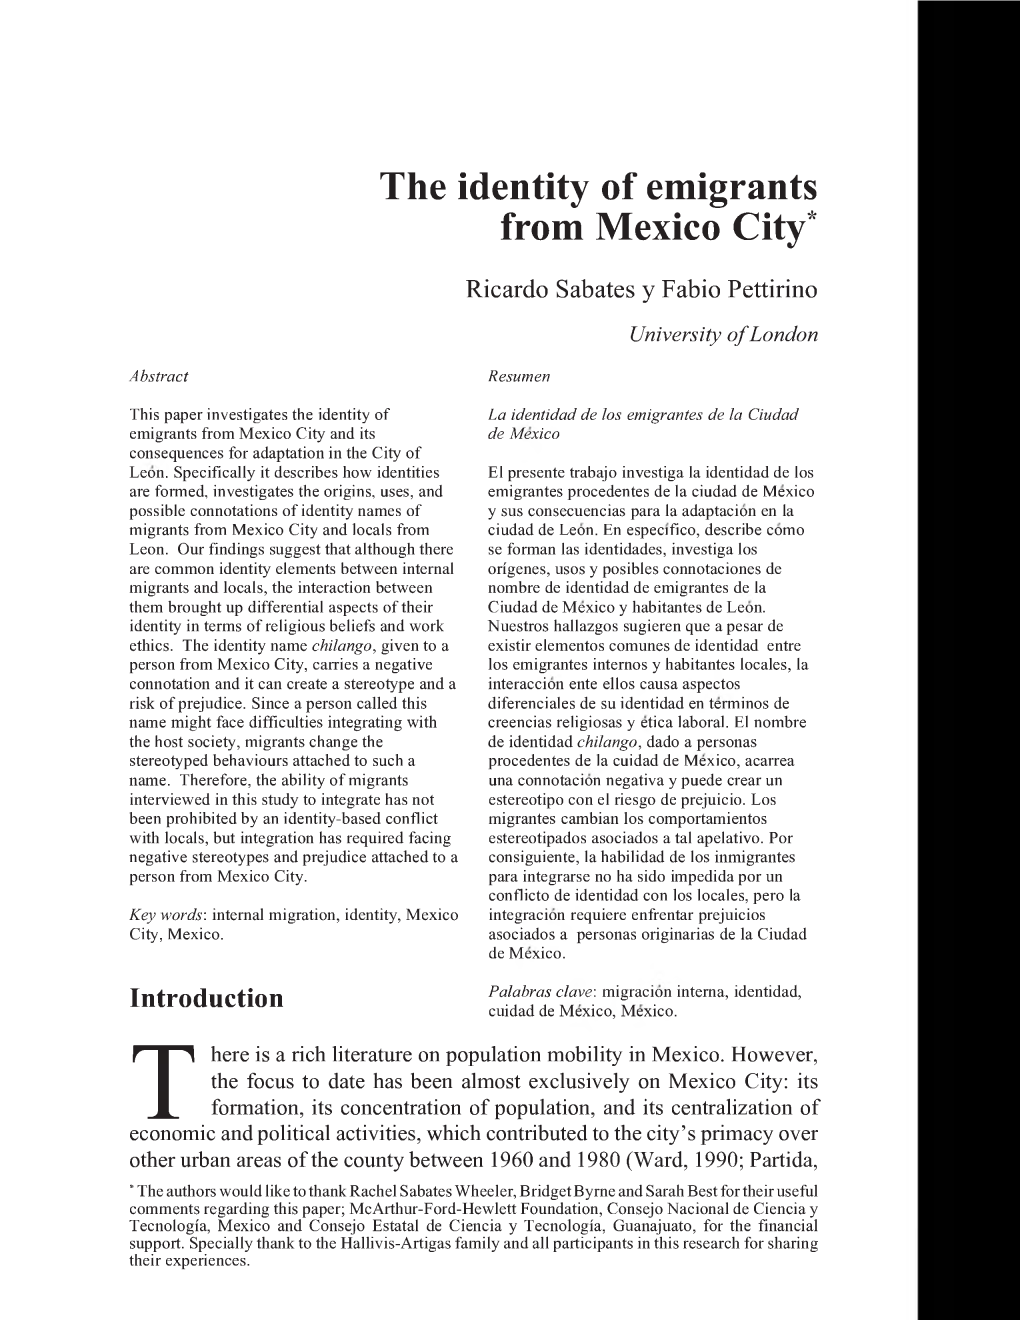 The Identity of Emigrants from Mexico City*